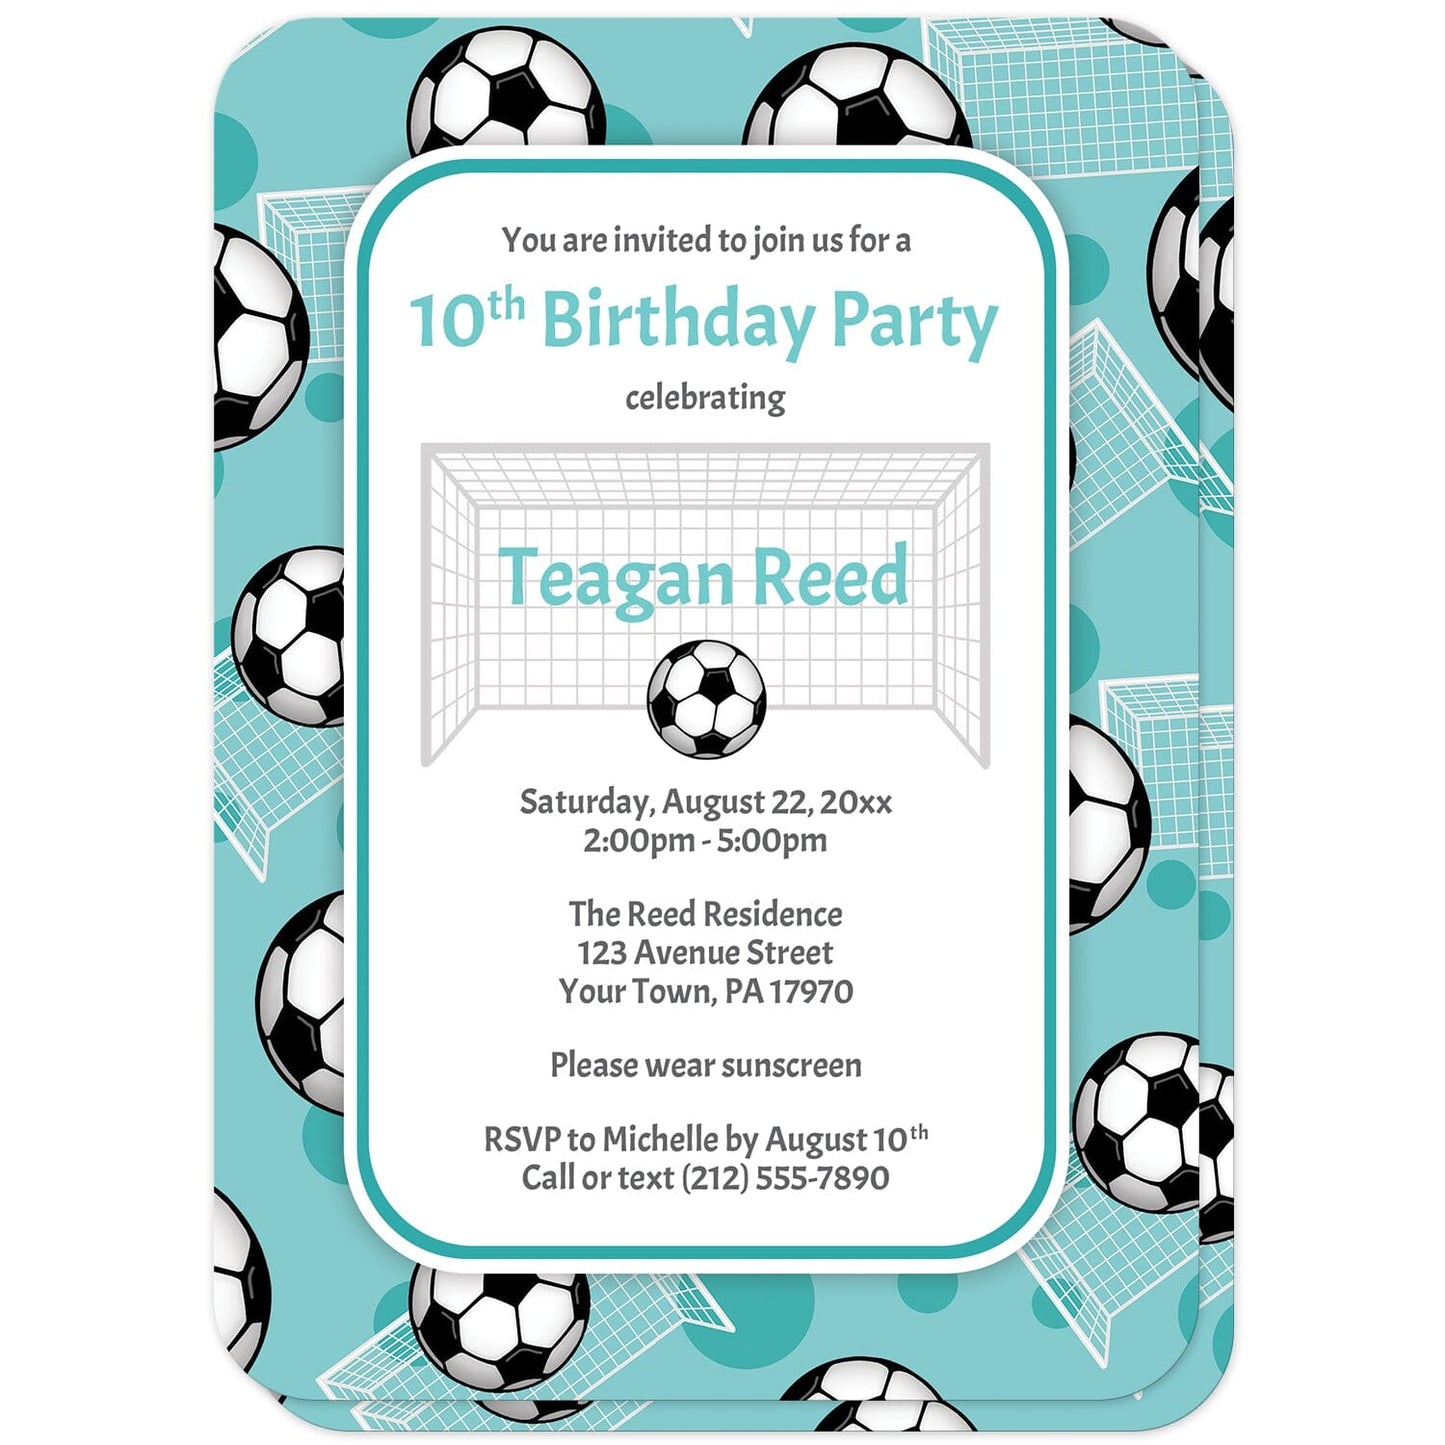 Soccer Ball and Goal Teal Birthday Party Invitations (with rounded corners) at Artistically Invited. Sports-themed soccer ball and goal teal birthday party invitations for any age or milestone that are uniquely illustrated with a pattern of soccer balls and soccer goals over a teal background color. Your personalized birthday party details are custom printed in teal and gray over white in the center over the soccer pattern.